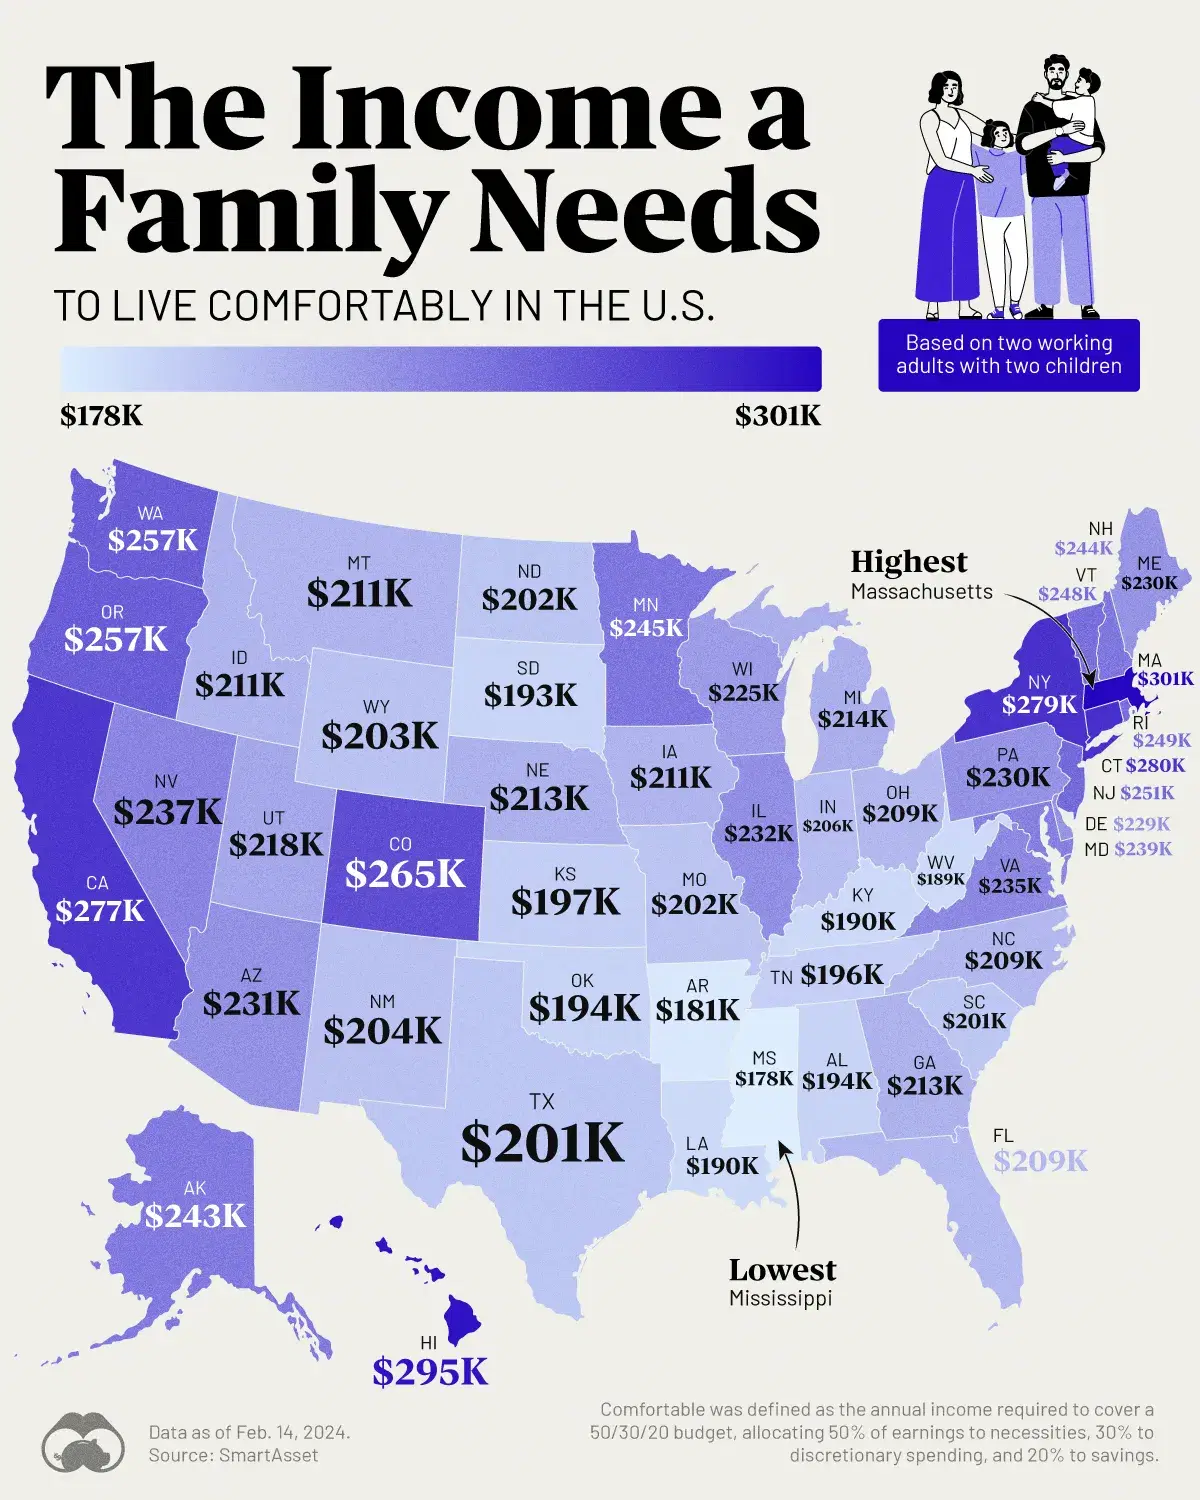 Families Need Over $270K Annually to Live Comfortably in Top Five States